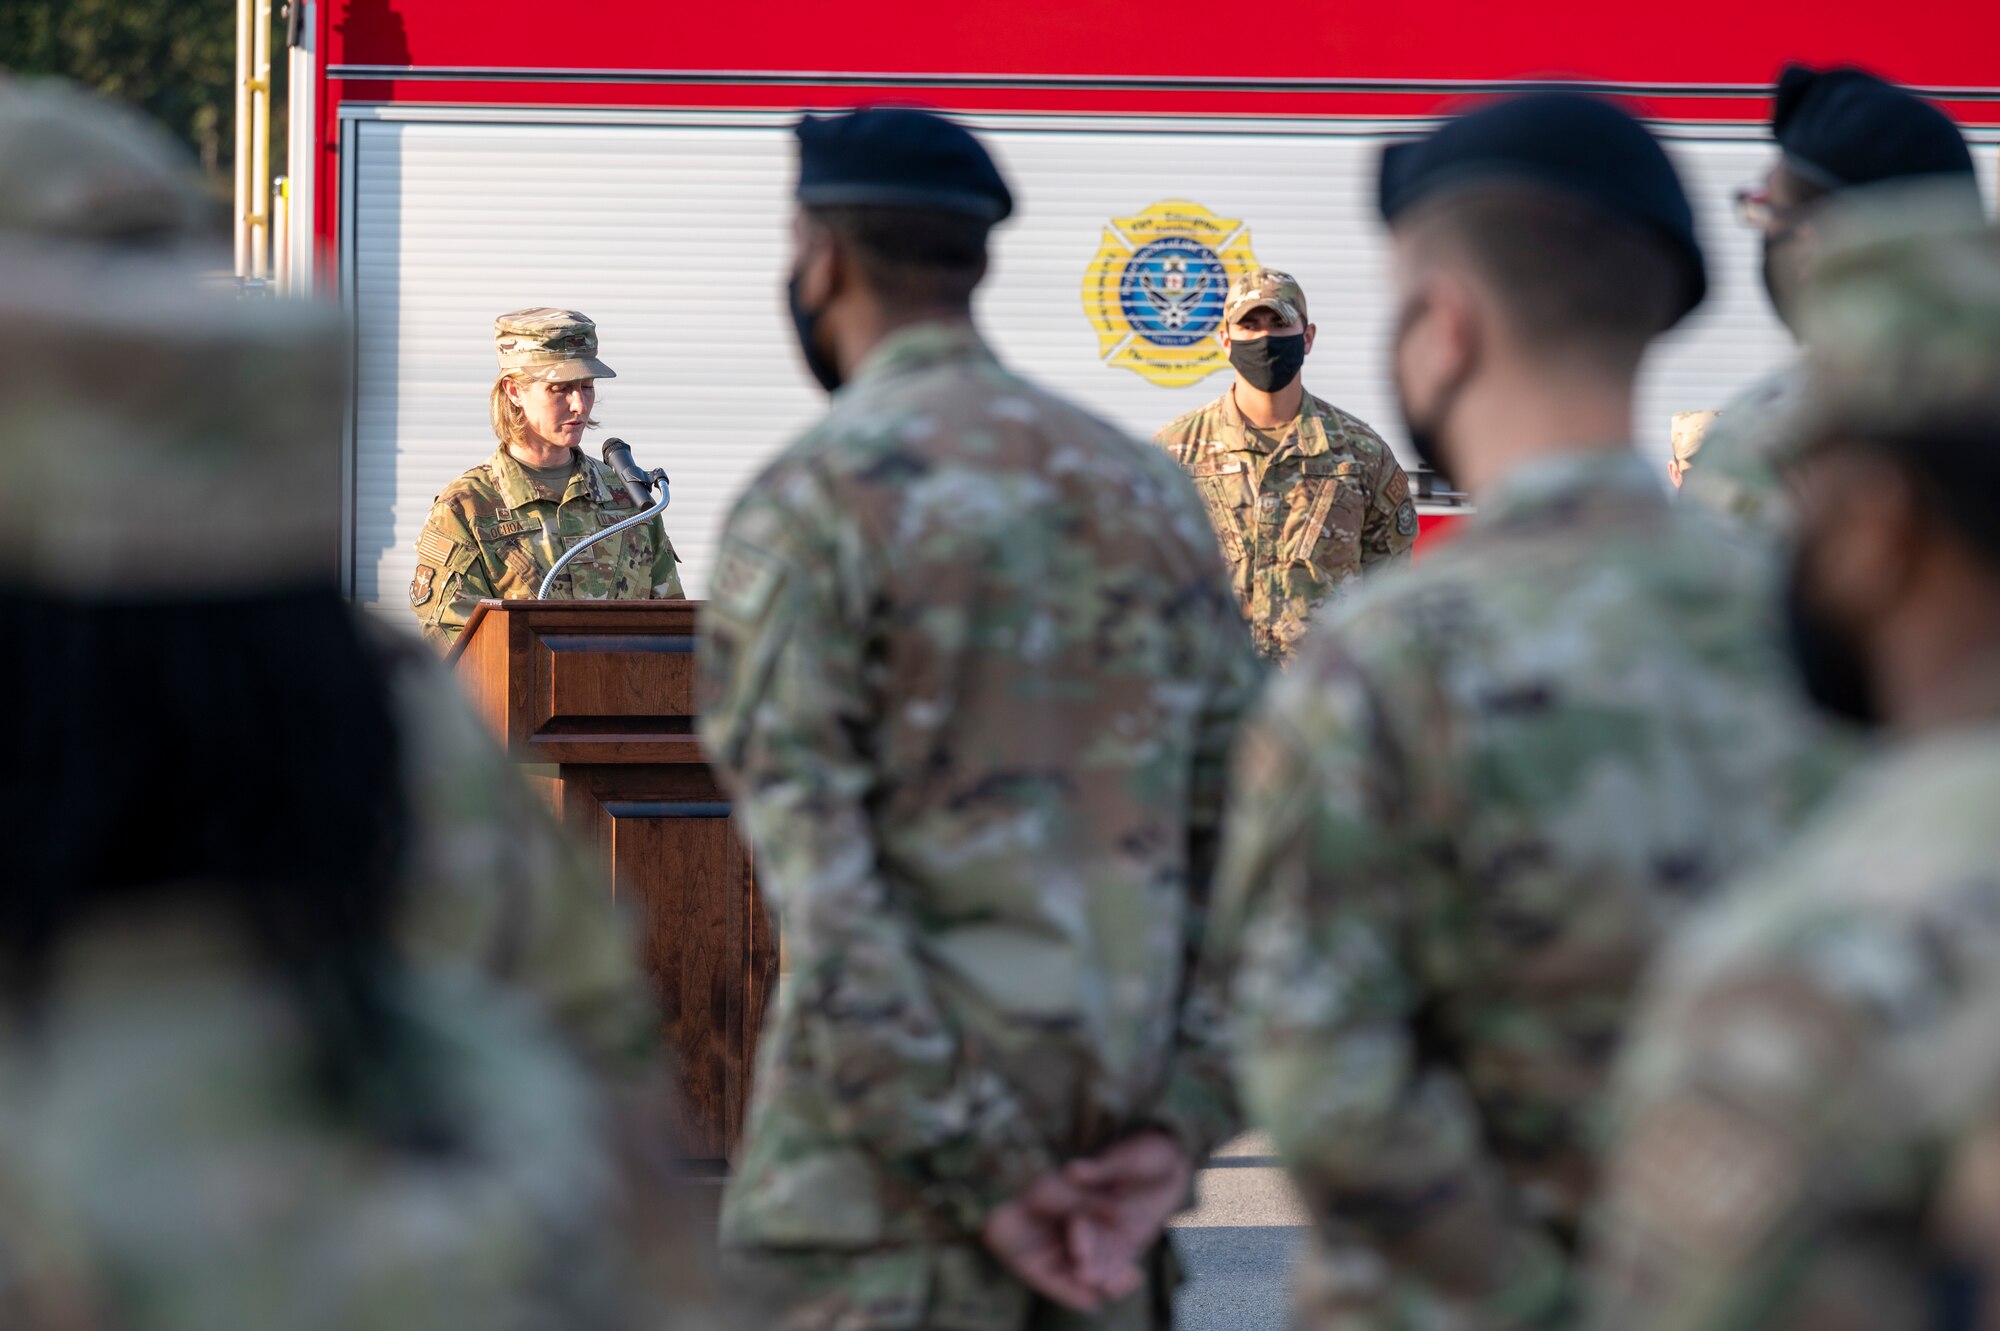 An Airman gives remarks during a ceremony